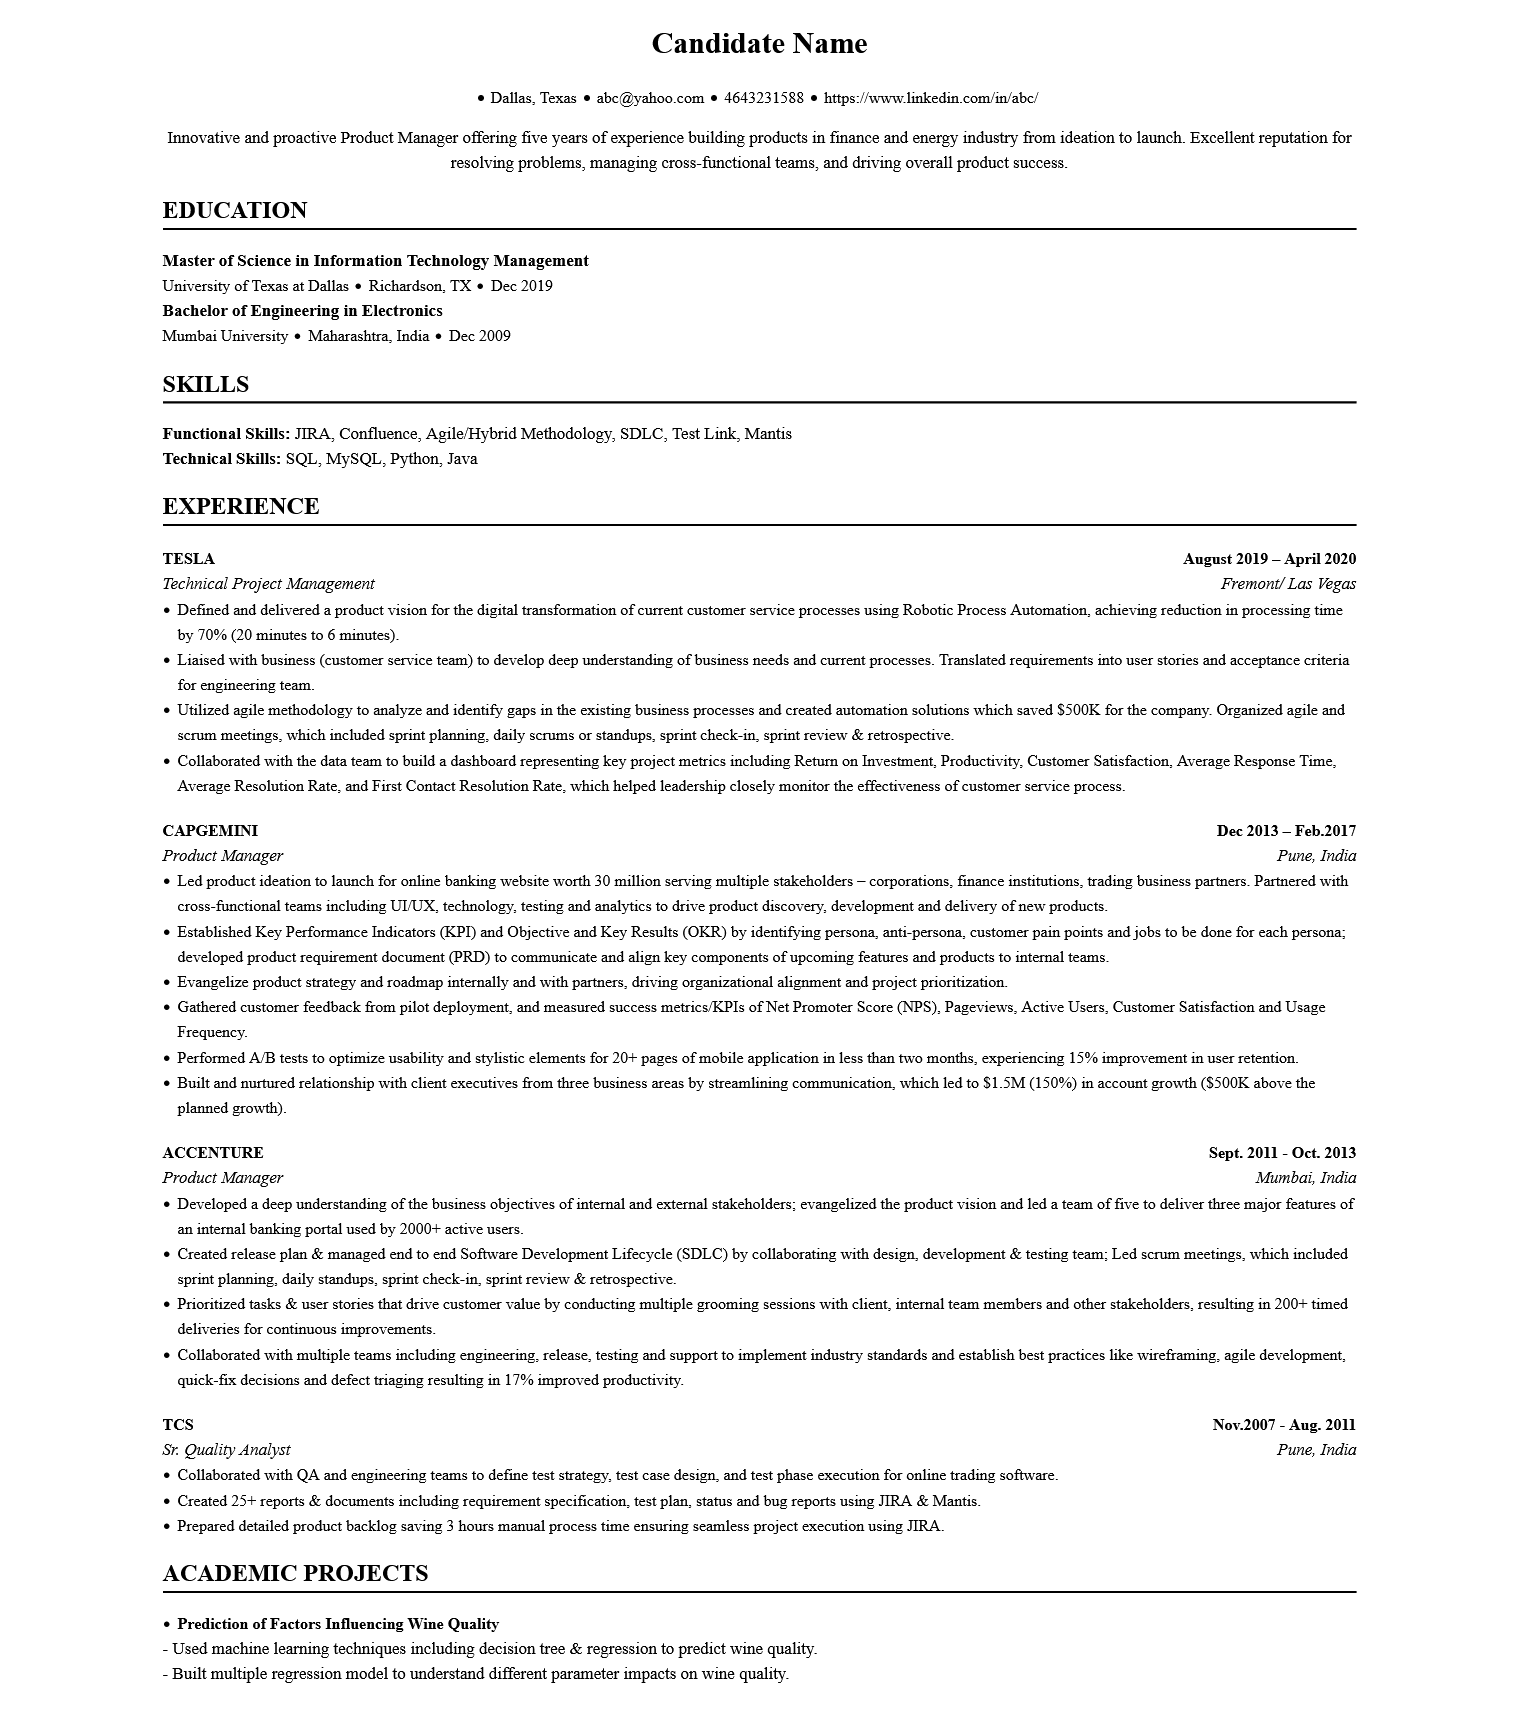 HiCounselor (Experience) Resume Template